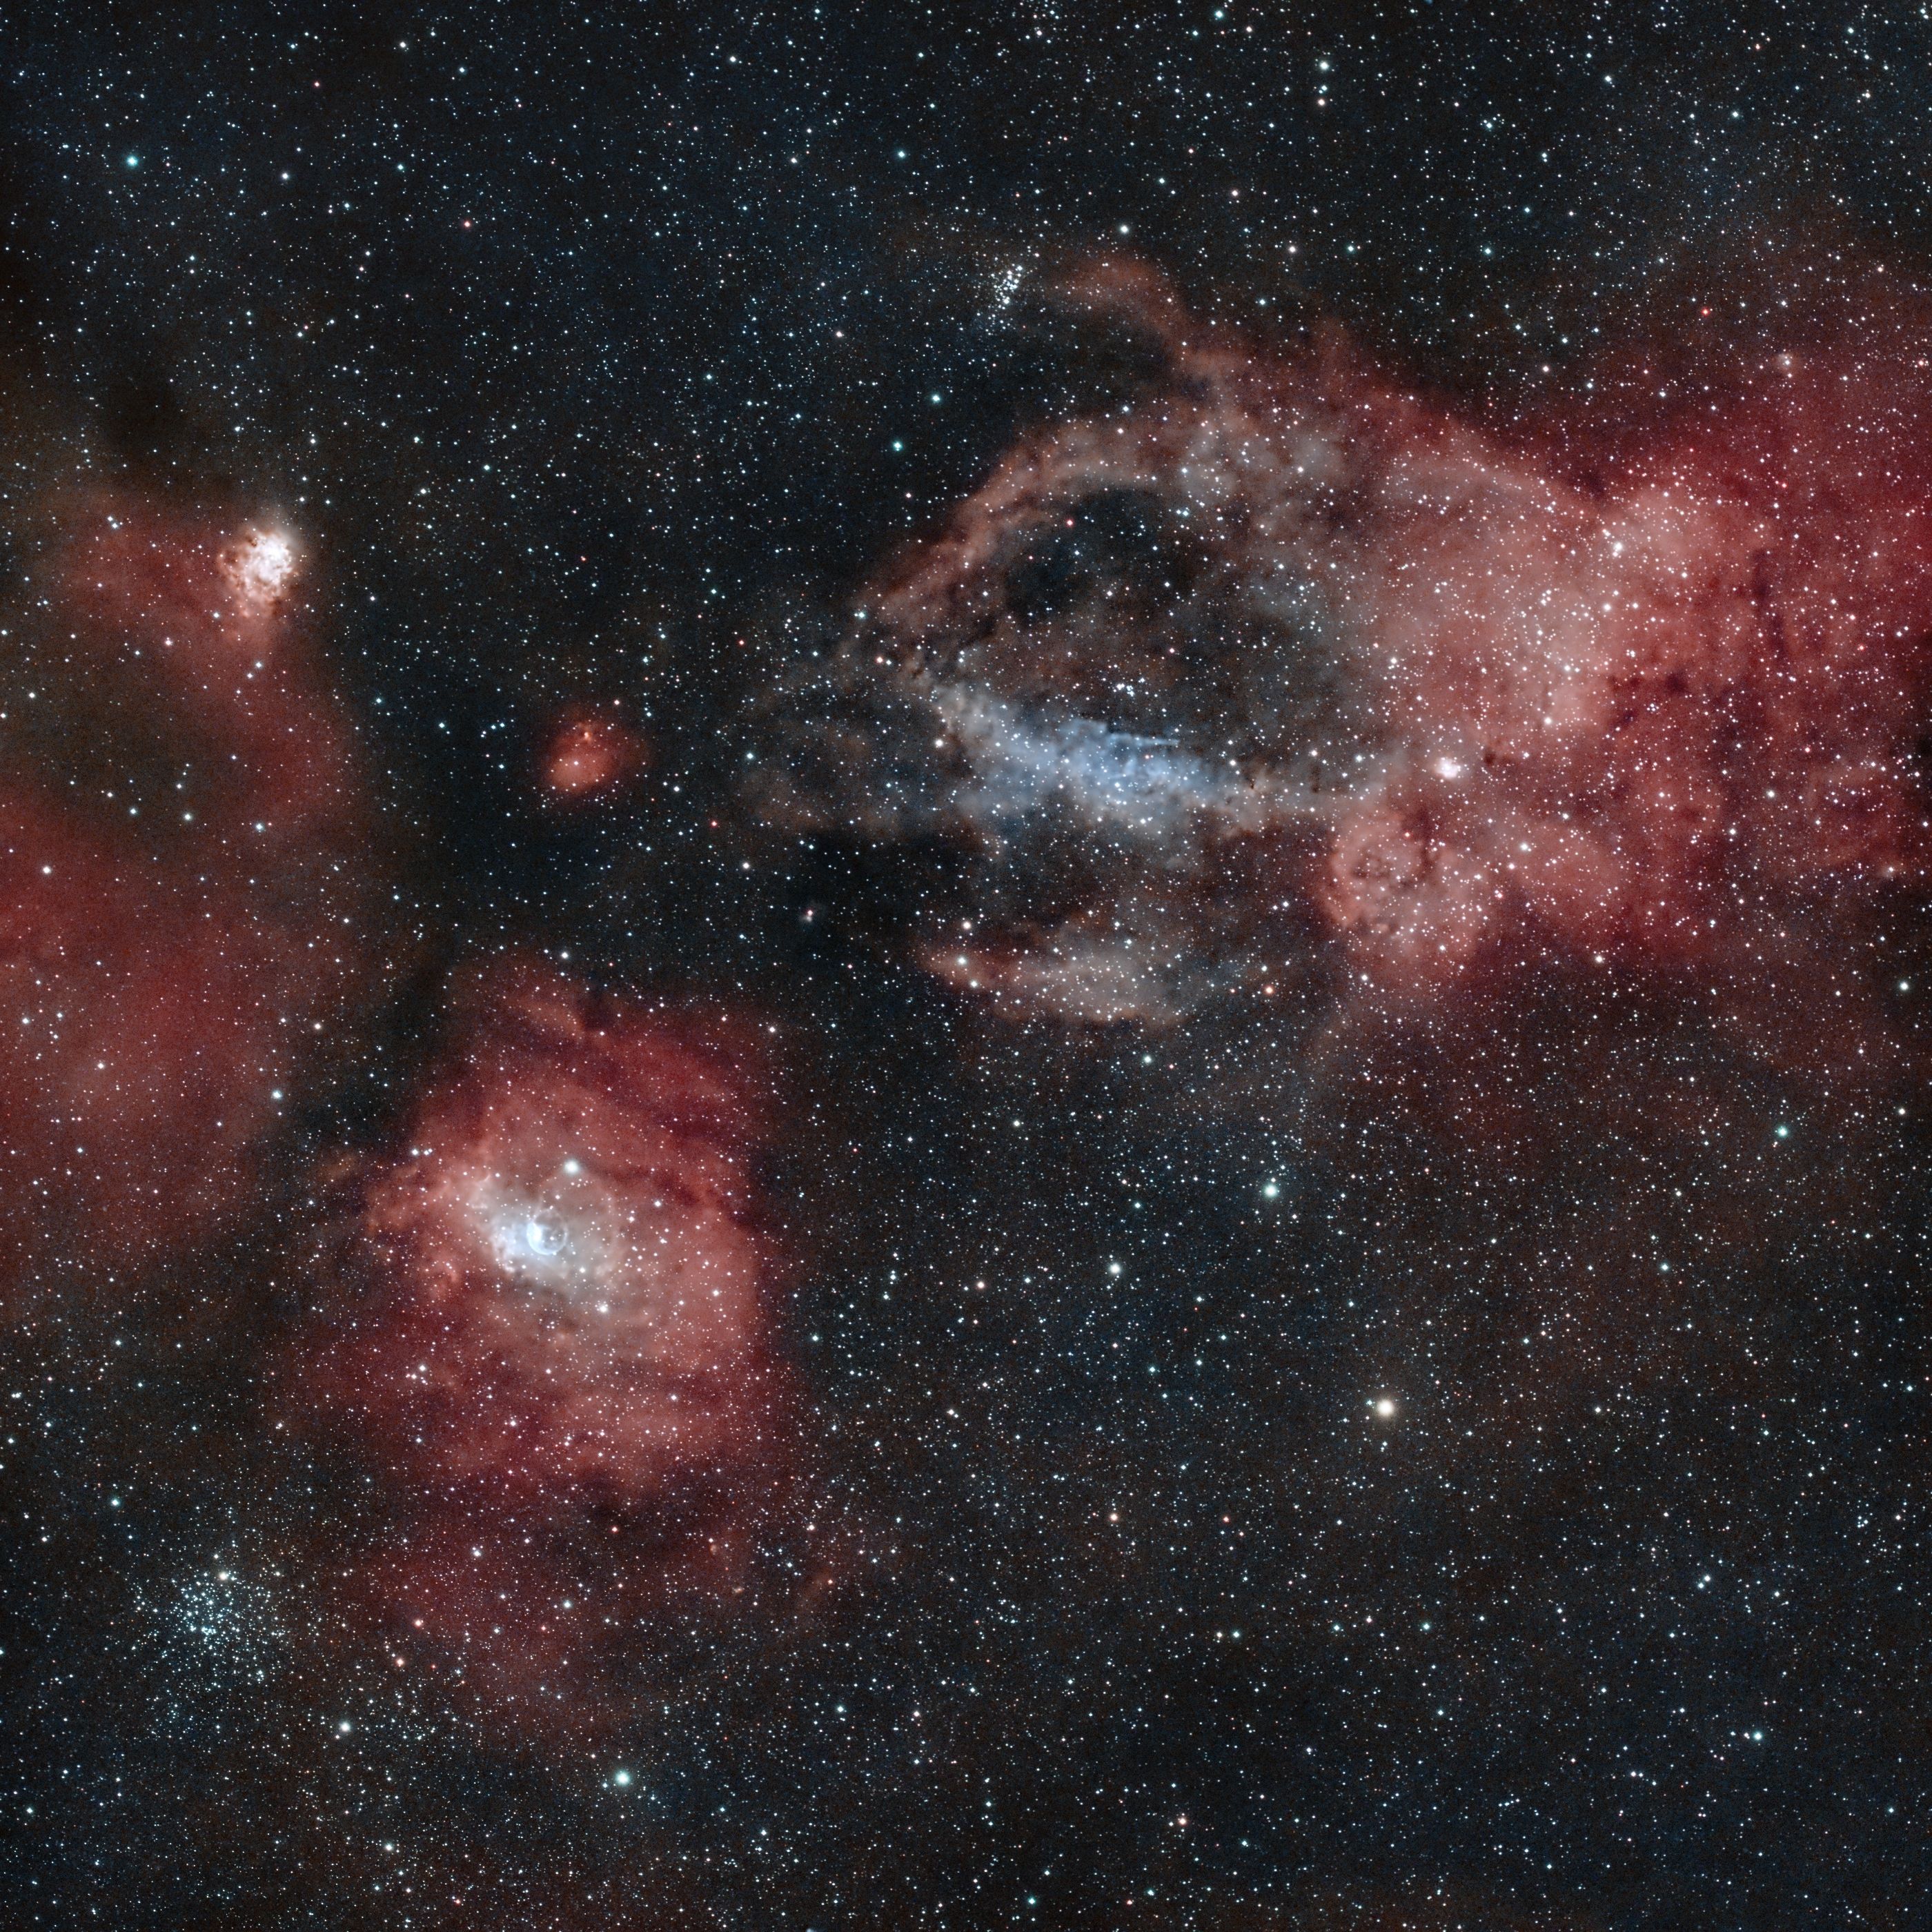 NGC7635, Sh2-157, The Bubble and the Lobster's Claw nebulae